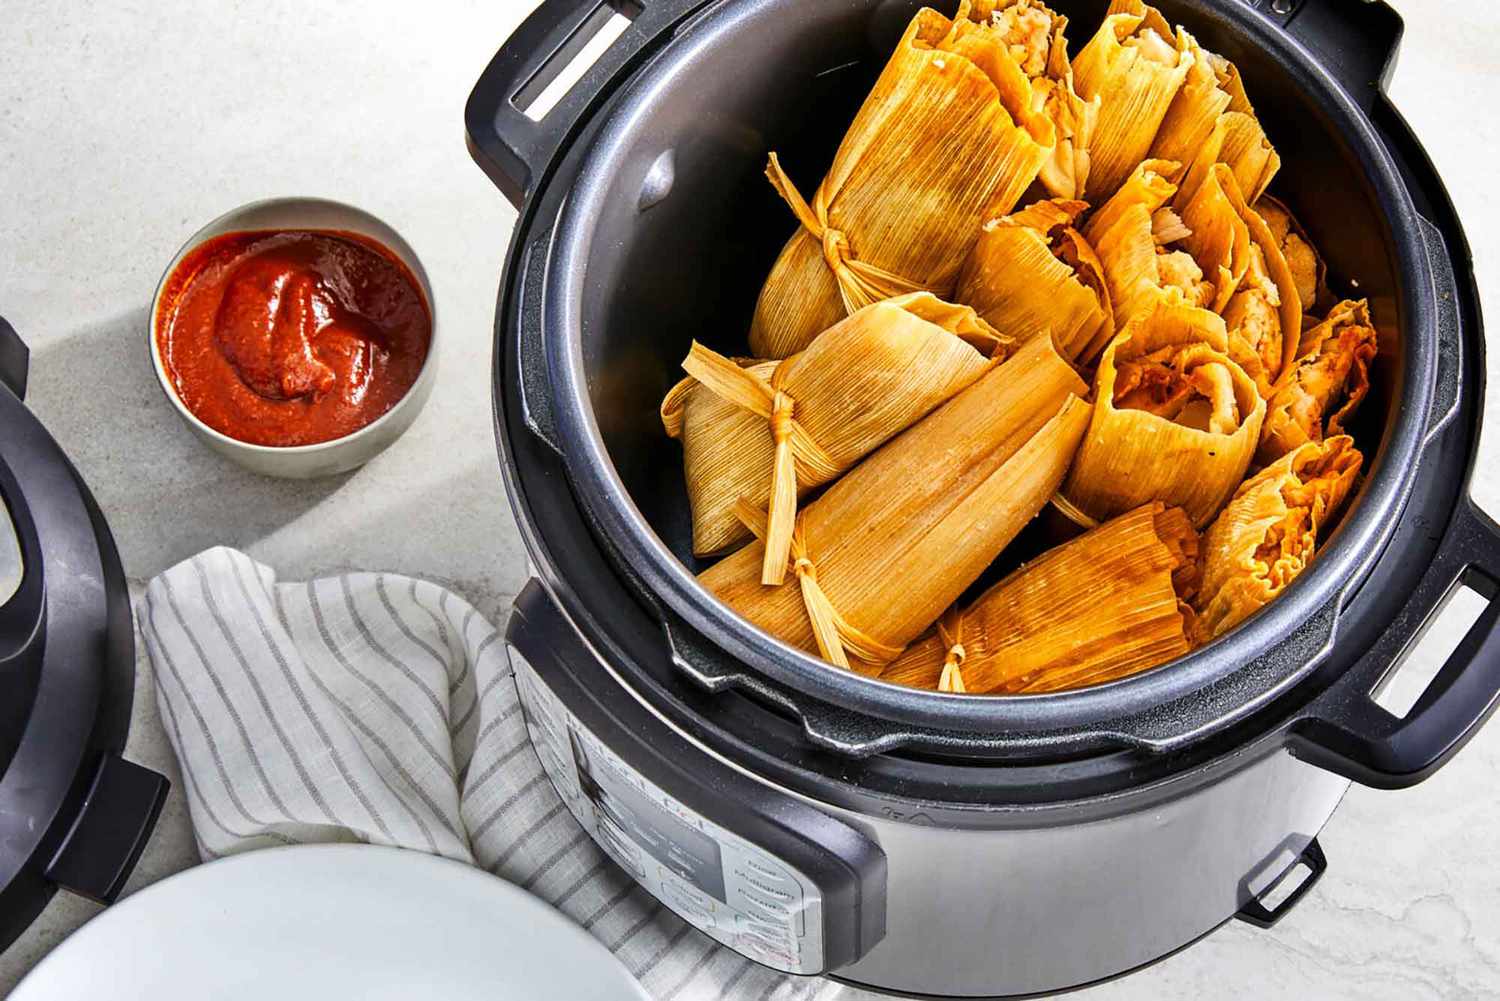 How Long Do You Cook Tamales In A Electric Pressure Cooker